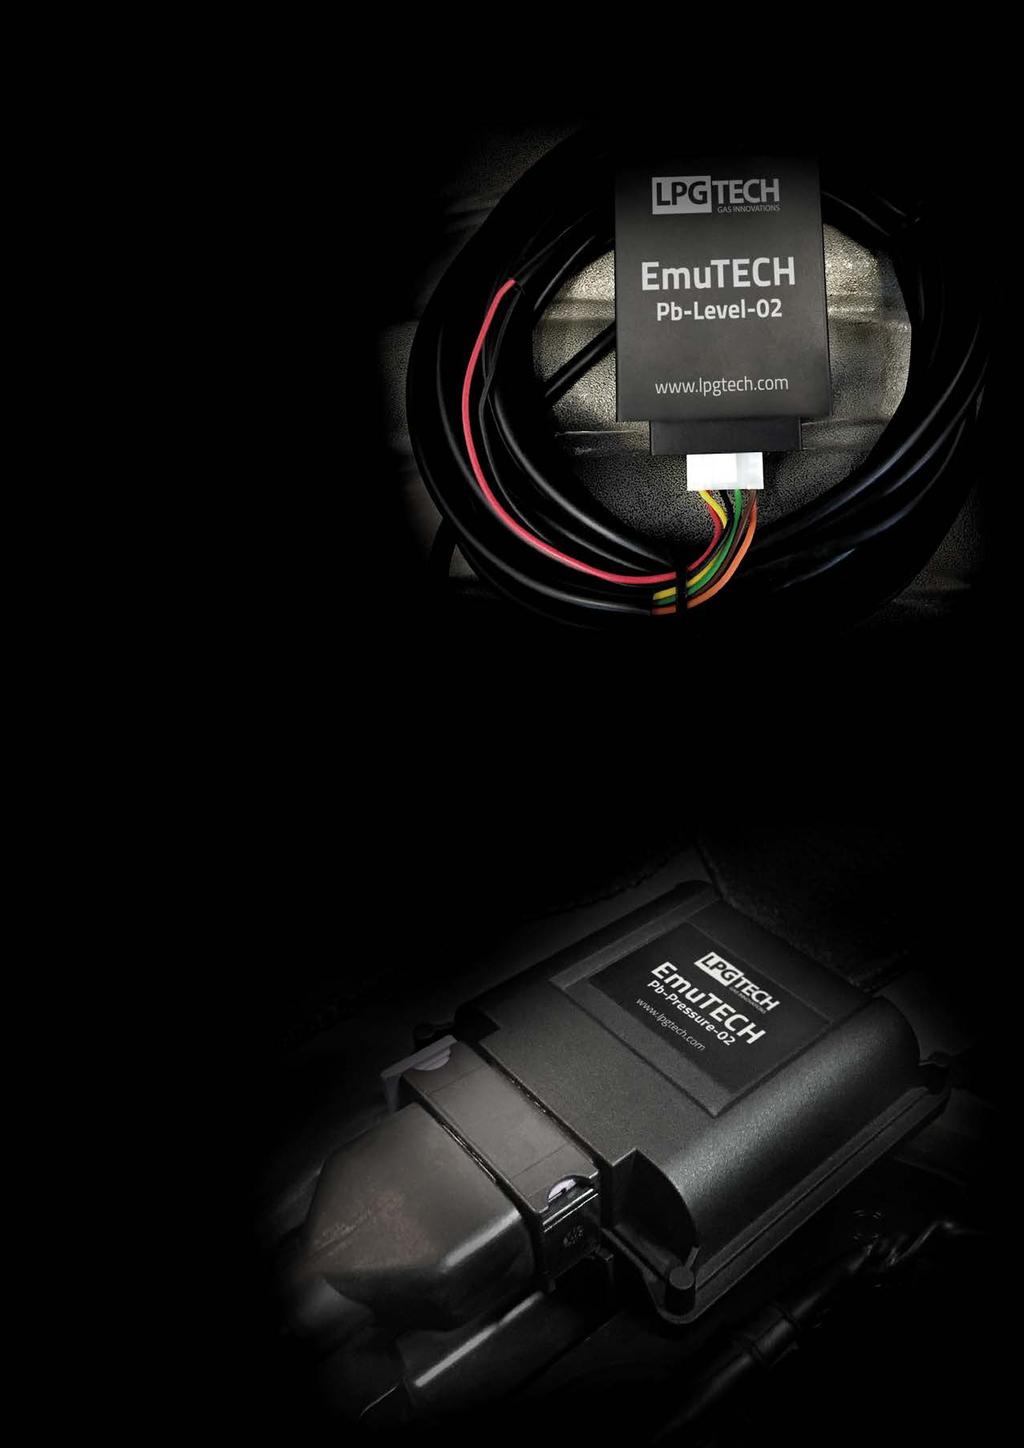 EmuTECH Pb-Level-02 PETROL LEVEL INDICATOR EMULATOR SCANNER TECH-OBD DIAGNOSIS AND COMMUNICATION OBD MODULE New version of EmuTECH Pb-Level emulator Compatible with vehicles where petrol level